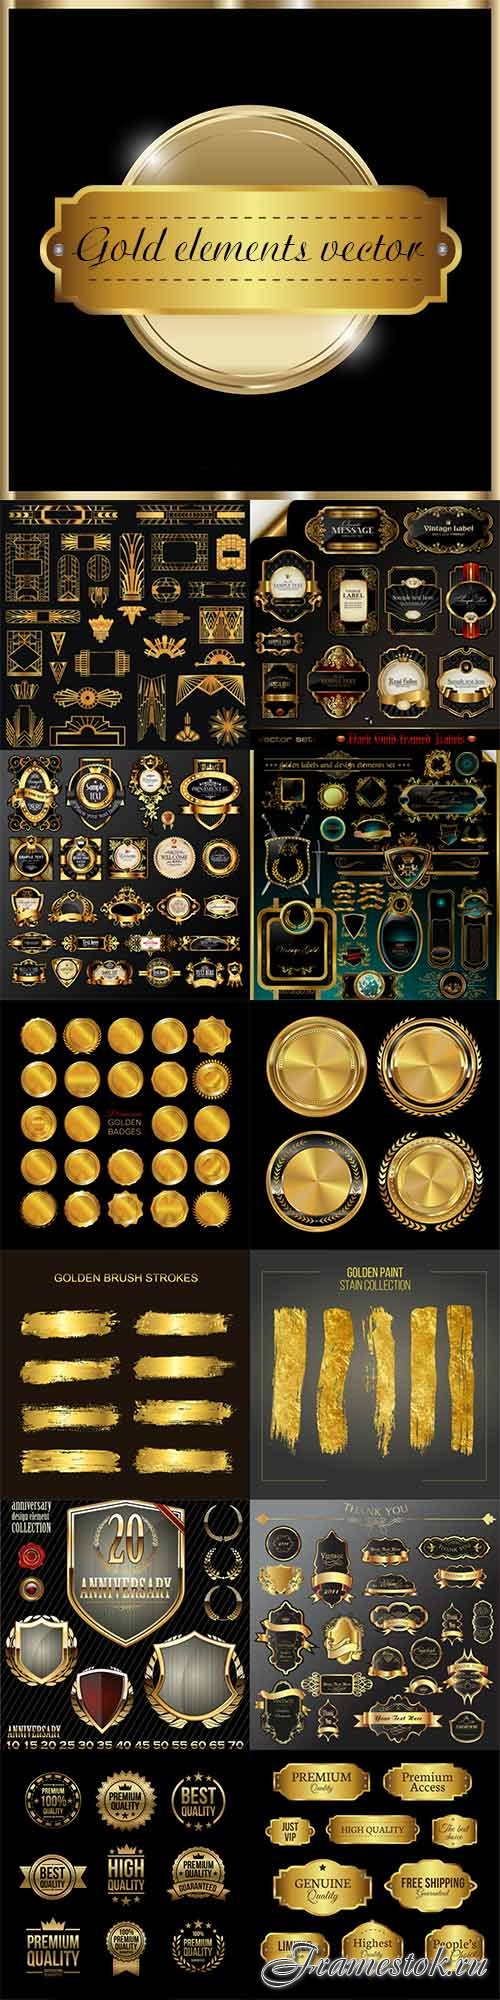 Various gold elements vector